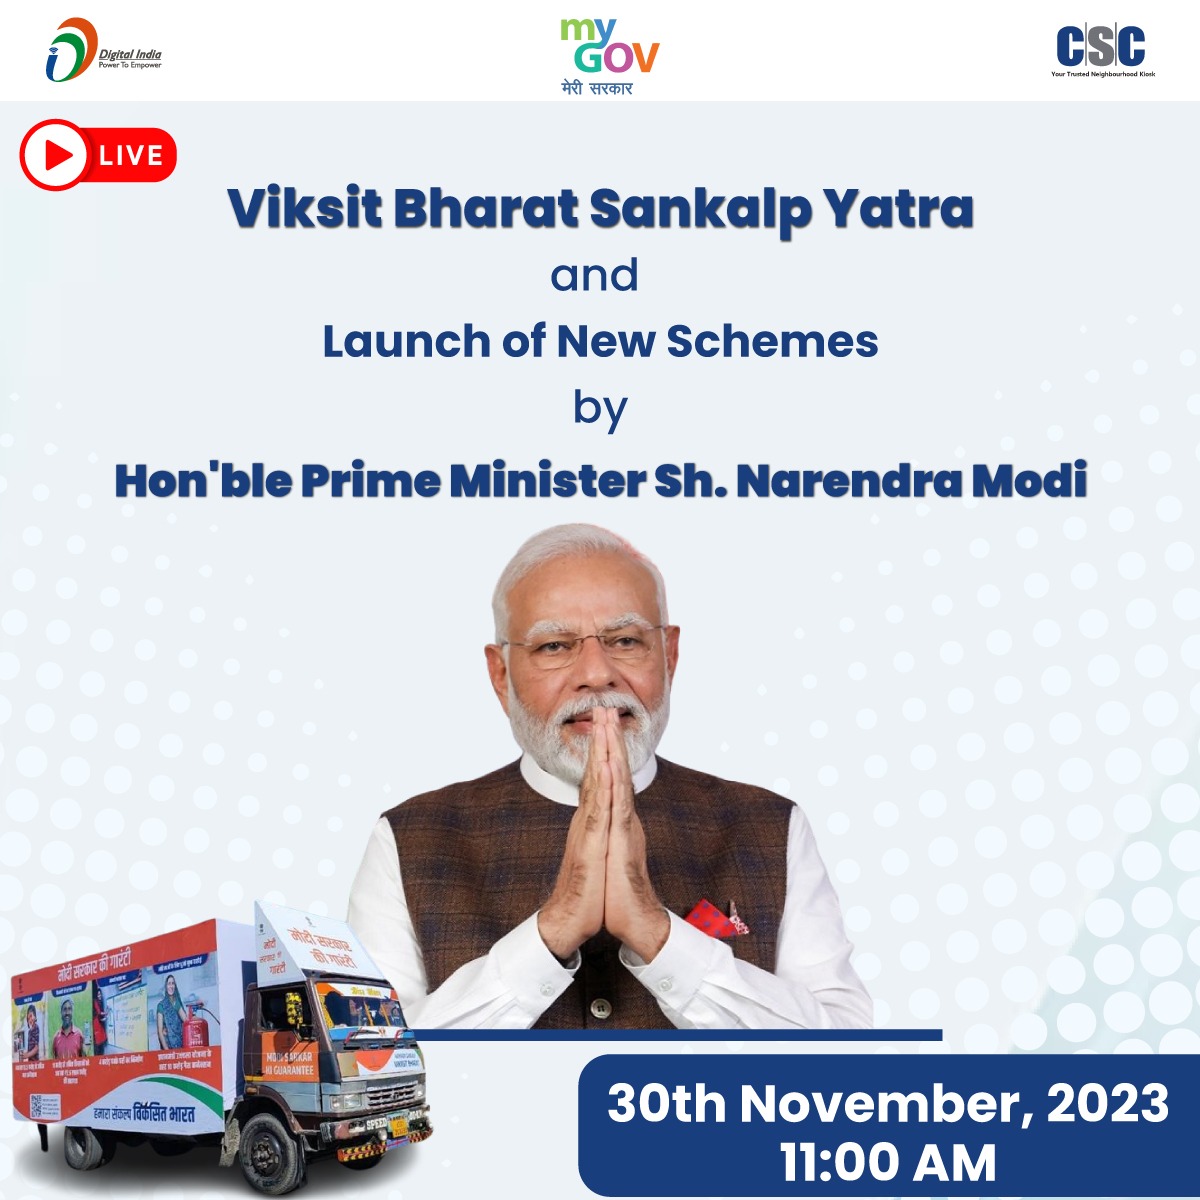 .#ViksitBharatSankalpYatra & Launch of New Schemes by Hon'ble PM Sh. Narendra Modi... Join us LIVE on the #CSC YouTube Page, on 30th November, 2023 from 11:00 AM onwards. youtube.com/watch?v=O-QYIl… VLEs to upload the images here: pmevent.csc-services.in/index.php?r=se… #HamaraSankalpViksitBharat